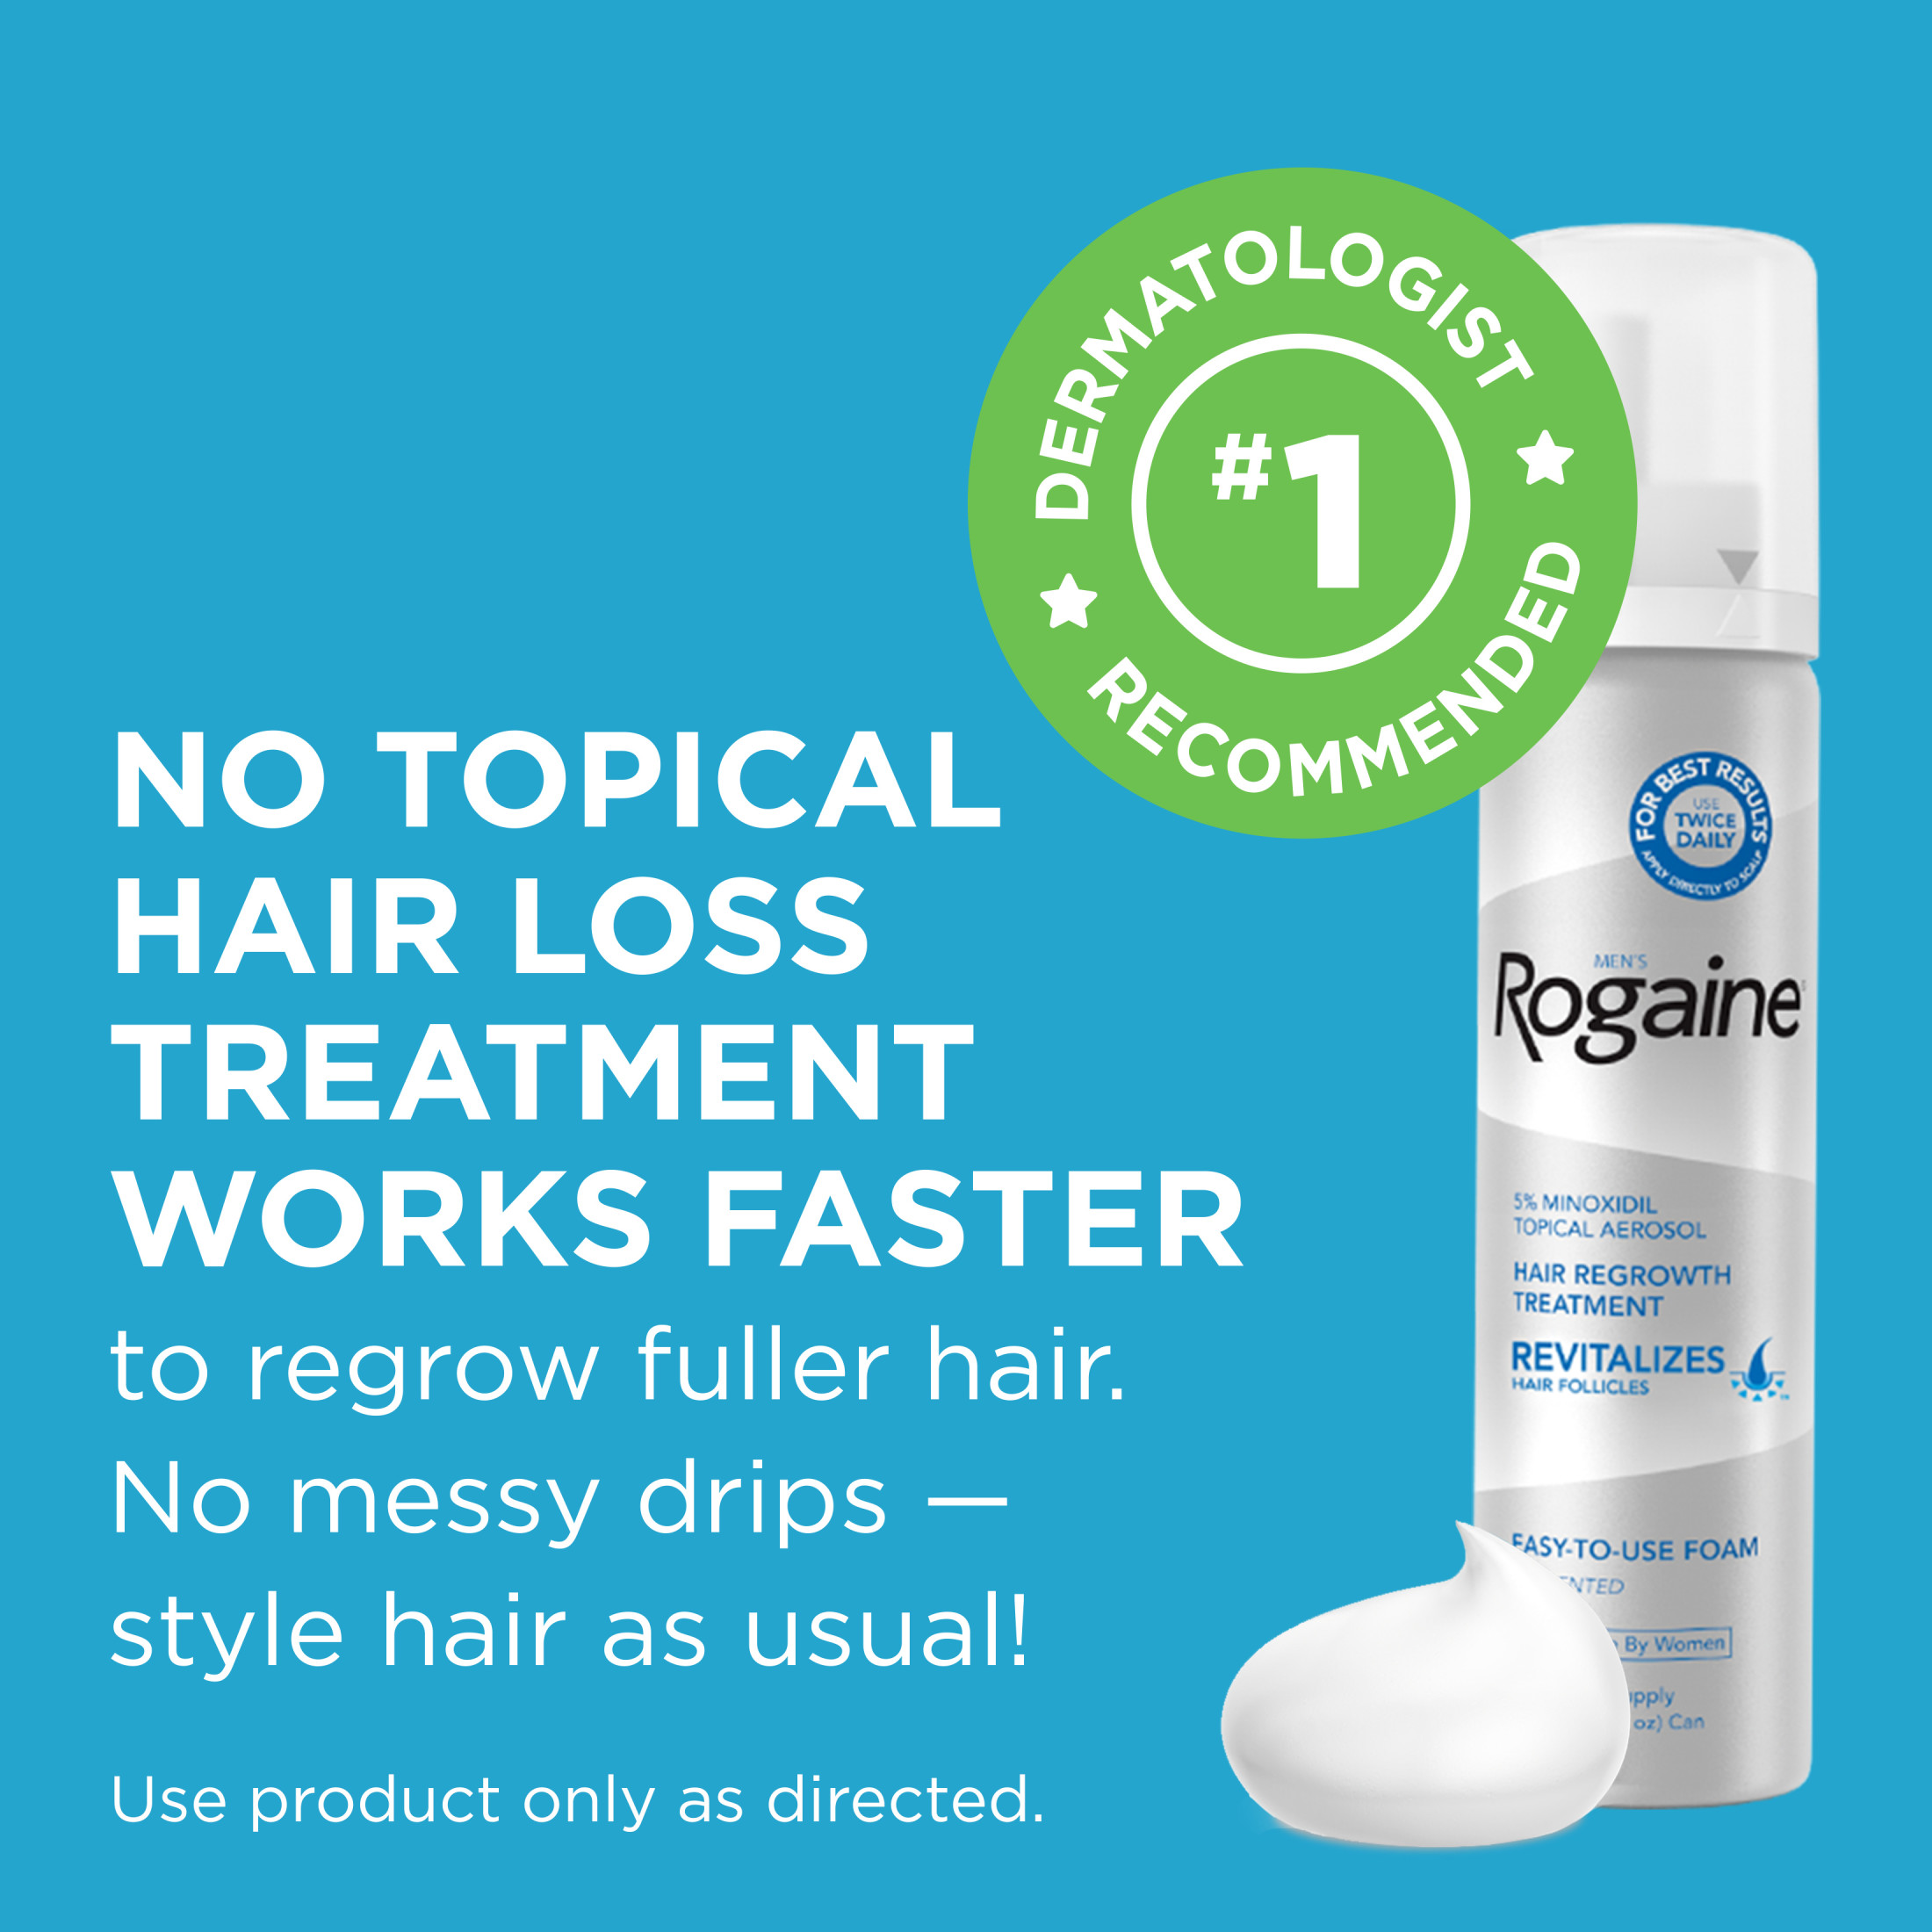 Men's Rogaine 5% Minoxidil Foam for Hair Regrowth, 3-month Supply - image 2 of 19